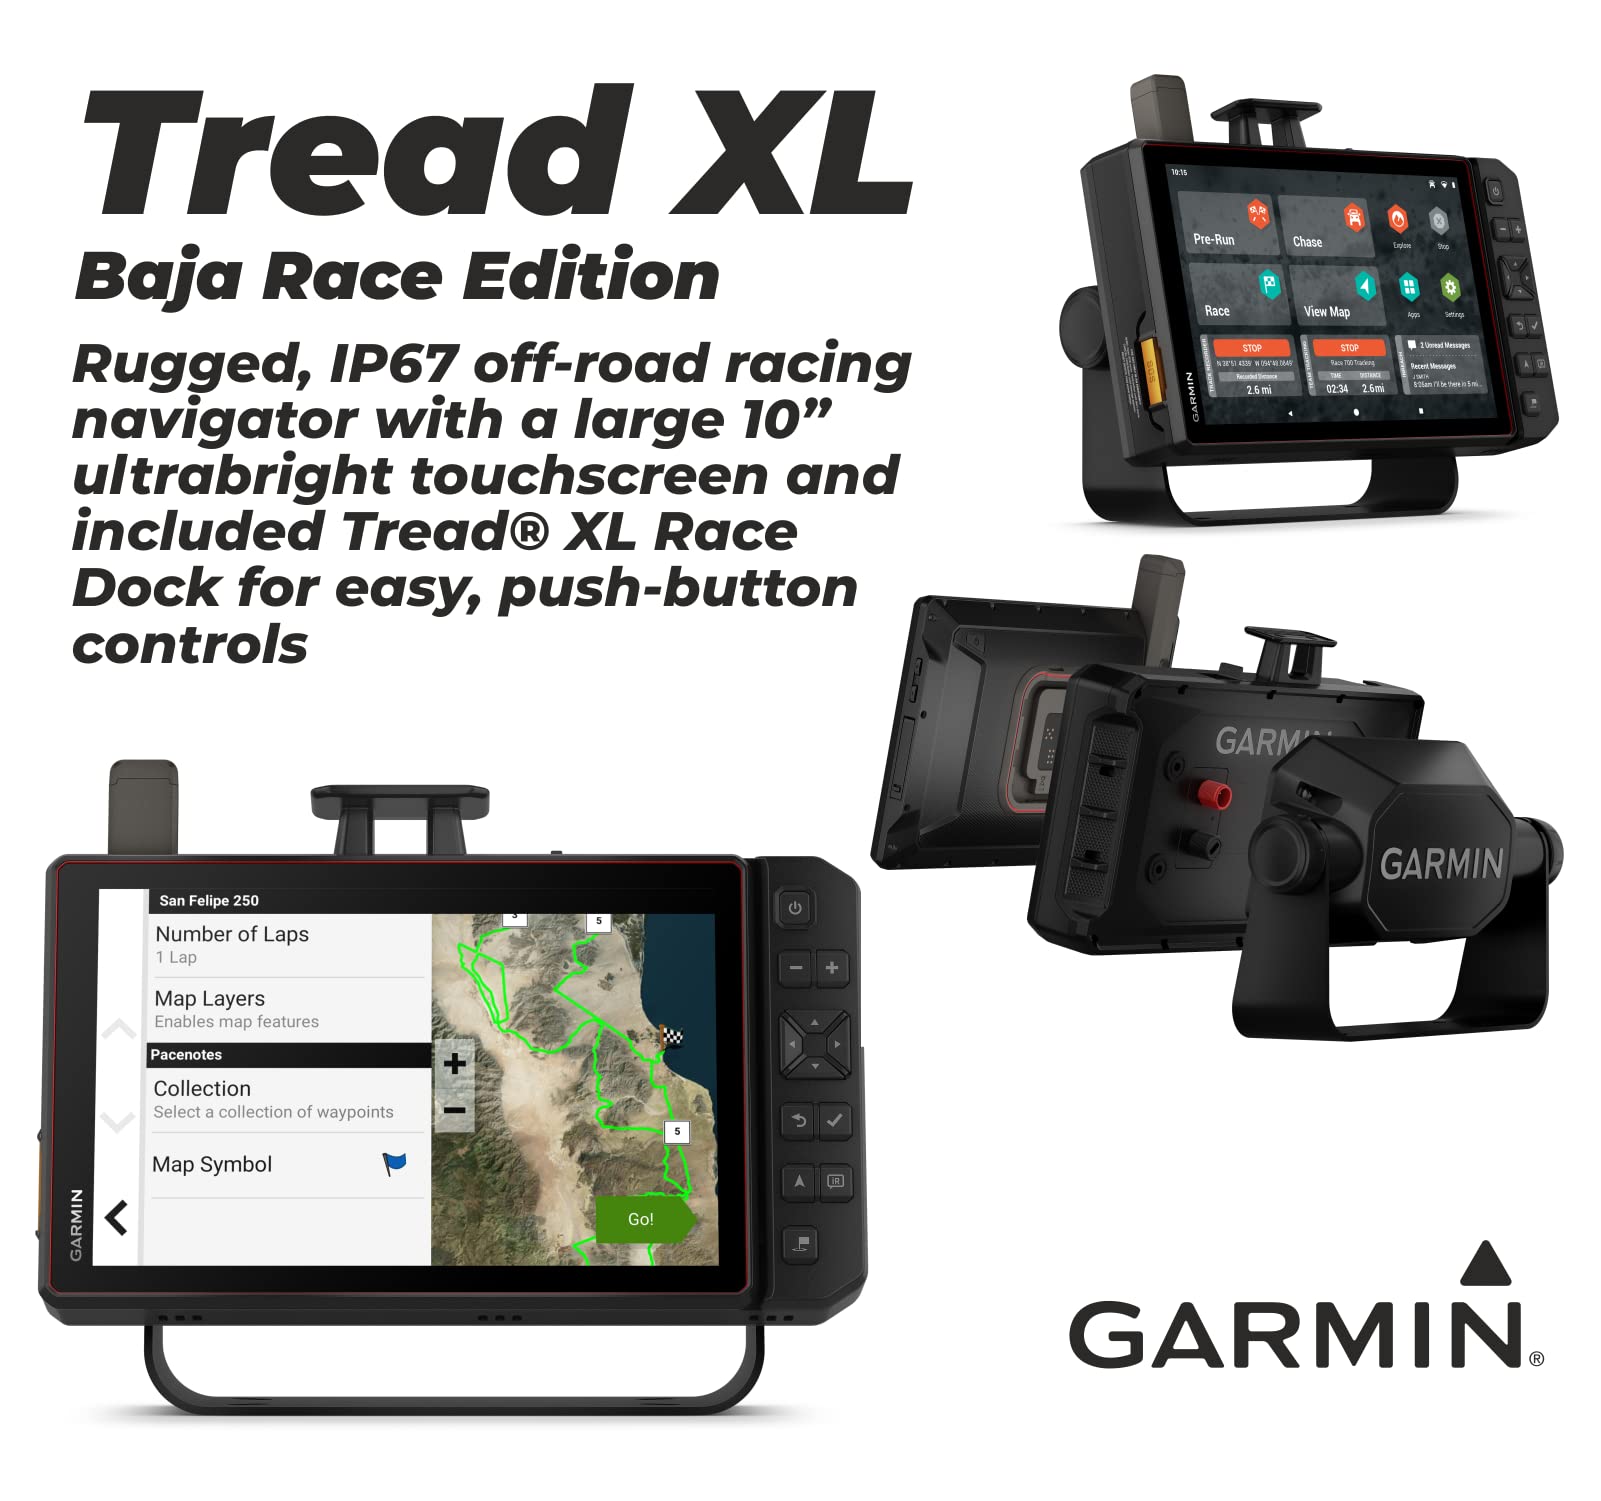 Garmin Tread XL - Baja Race Edition, Rugged, ultrabright 10” Off-Road Race Navigator, Team Tracking with Built-in inReach Satellite Communication with Wearable4U Power Pack Bundle